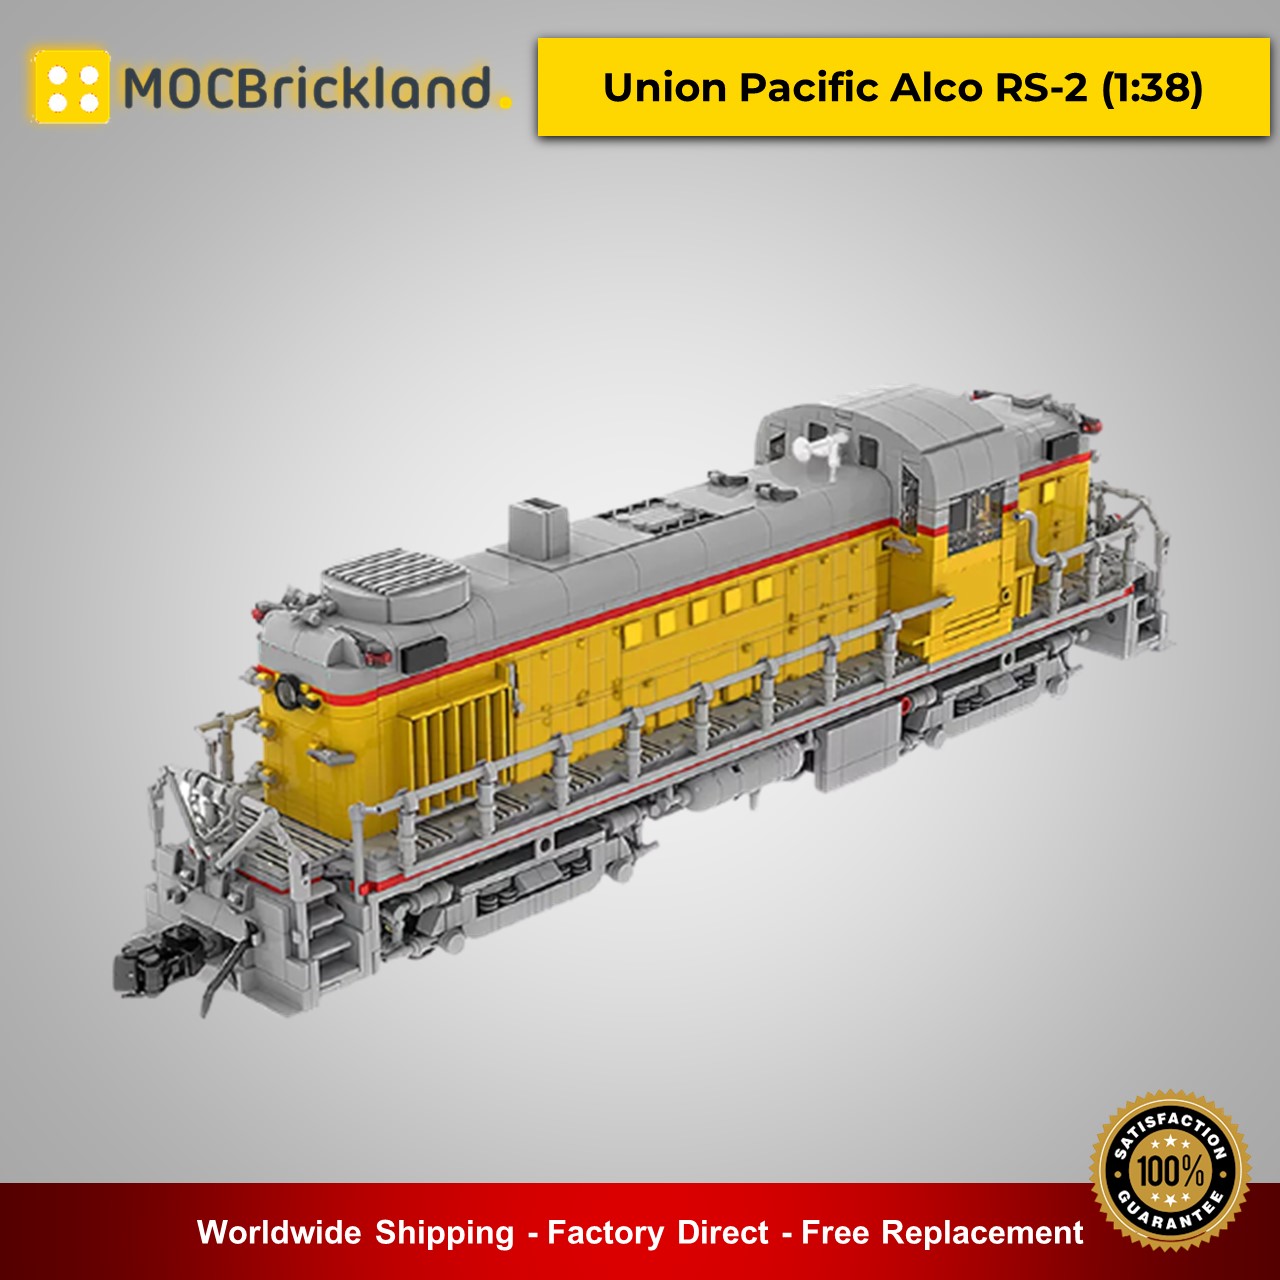 MOC-52188 Technic Union Pacific Alco RS-2 (1:38) Designed By MasterBuilderKTC With 2248 Pieces